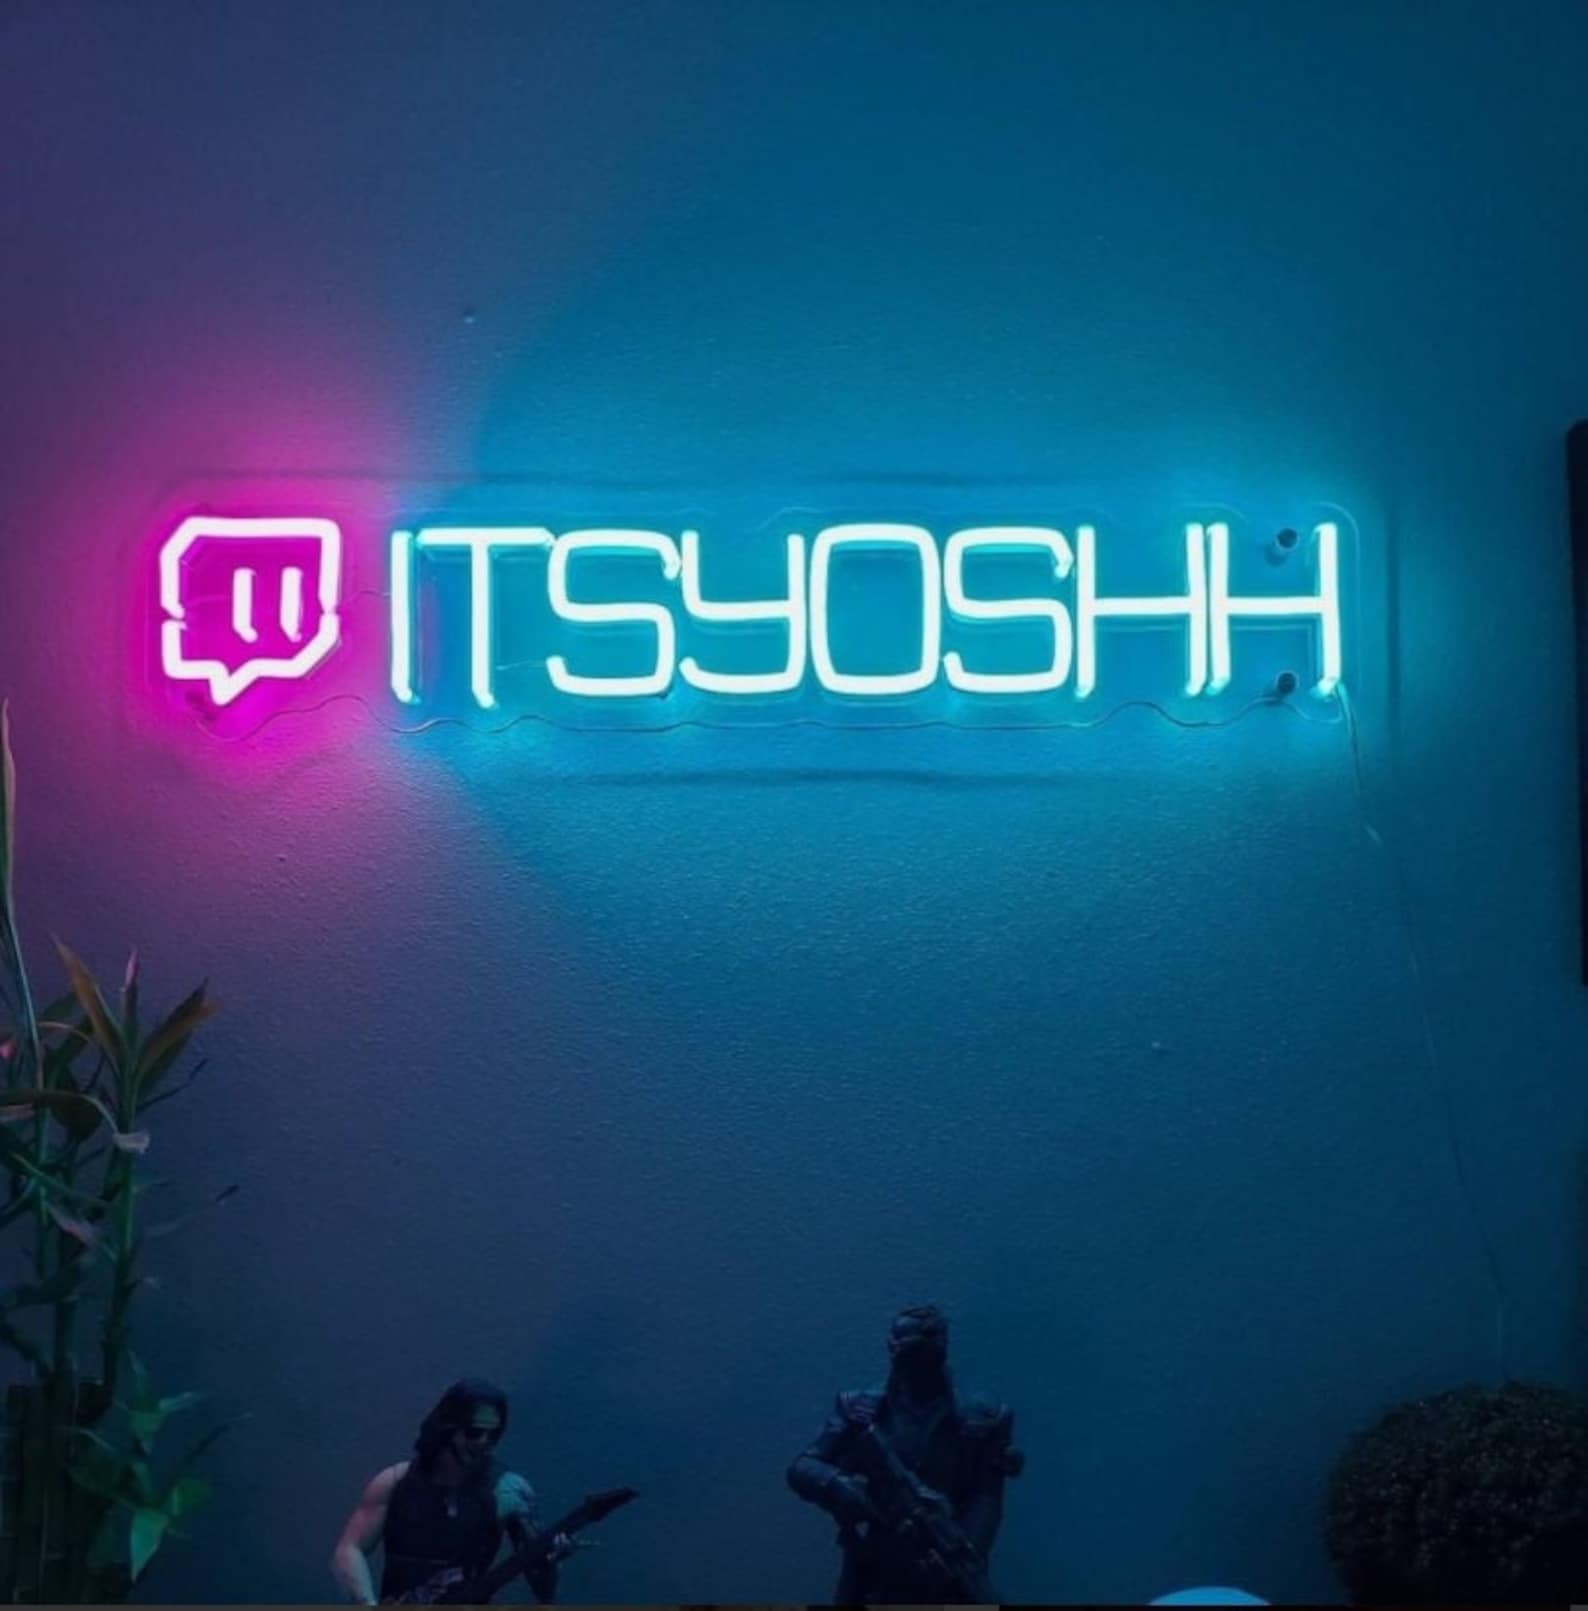 Twitch username neon sign